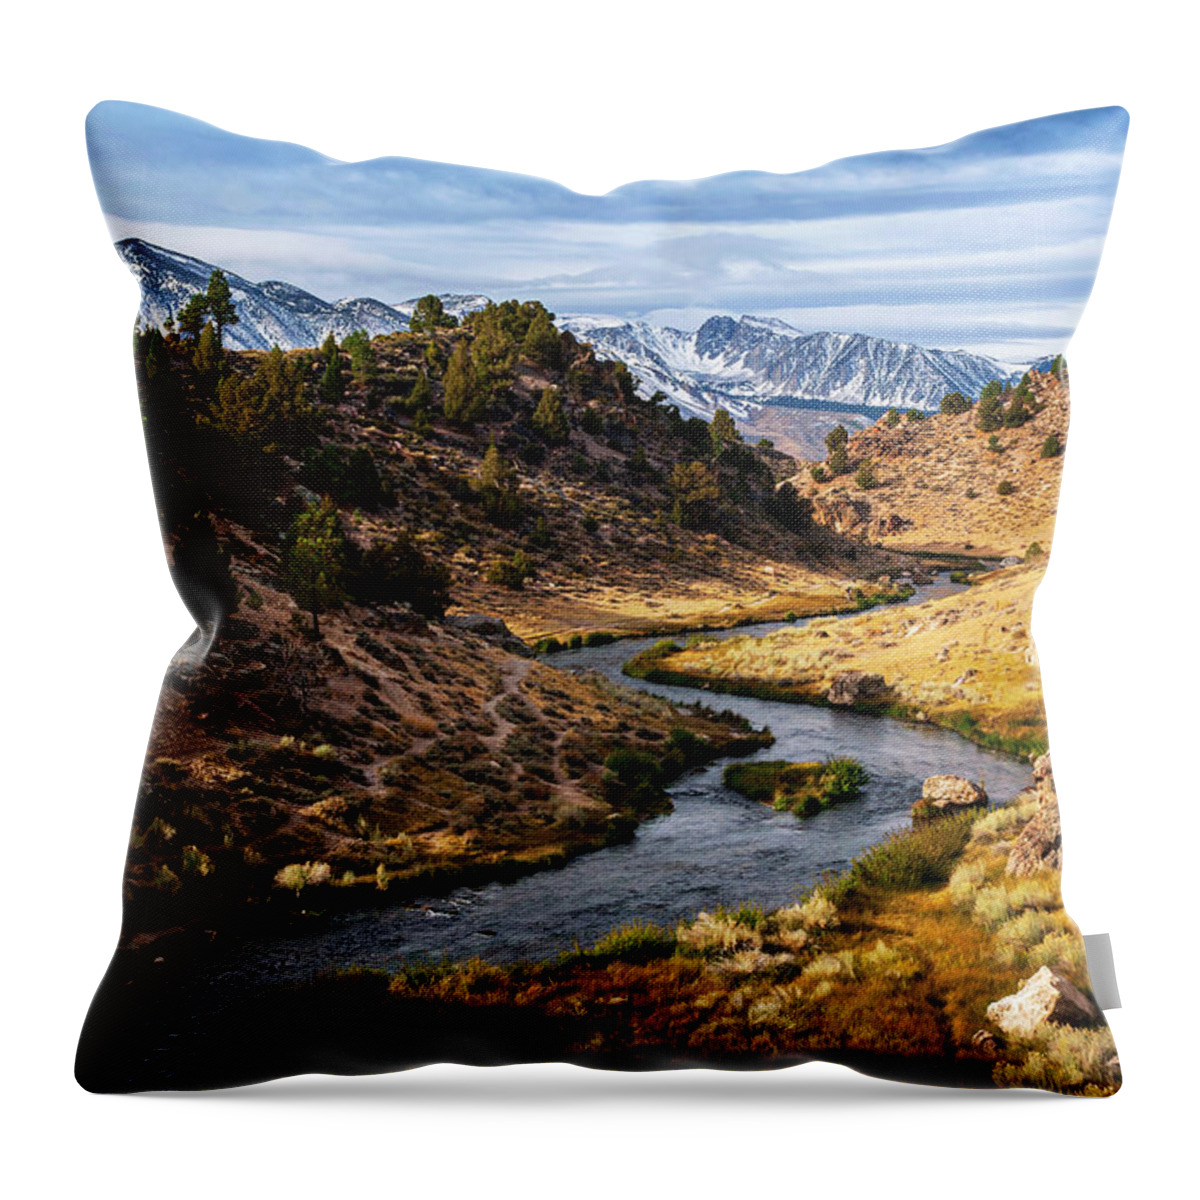 Mountains Throw Pillow featuring the photograph Mountain Paradise by Ryan Huebel